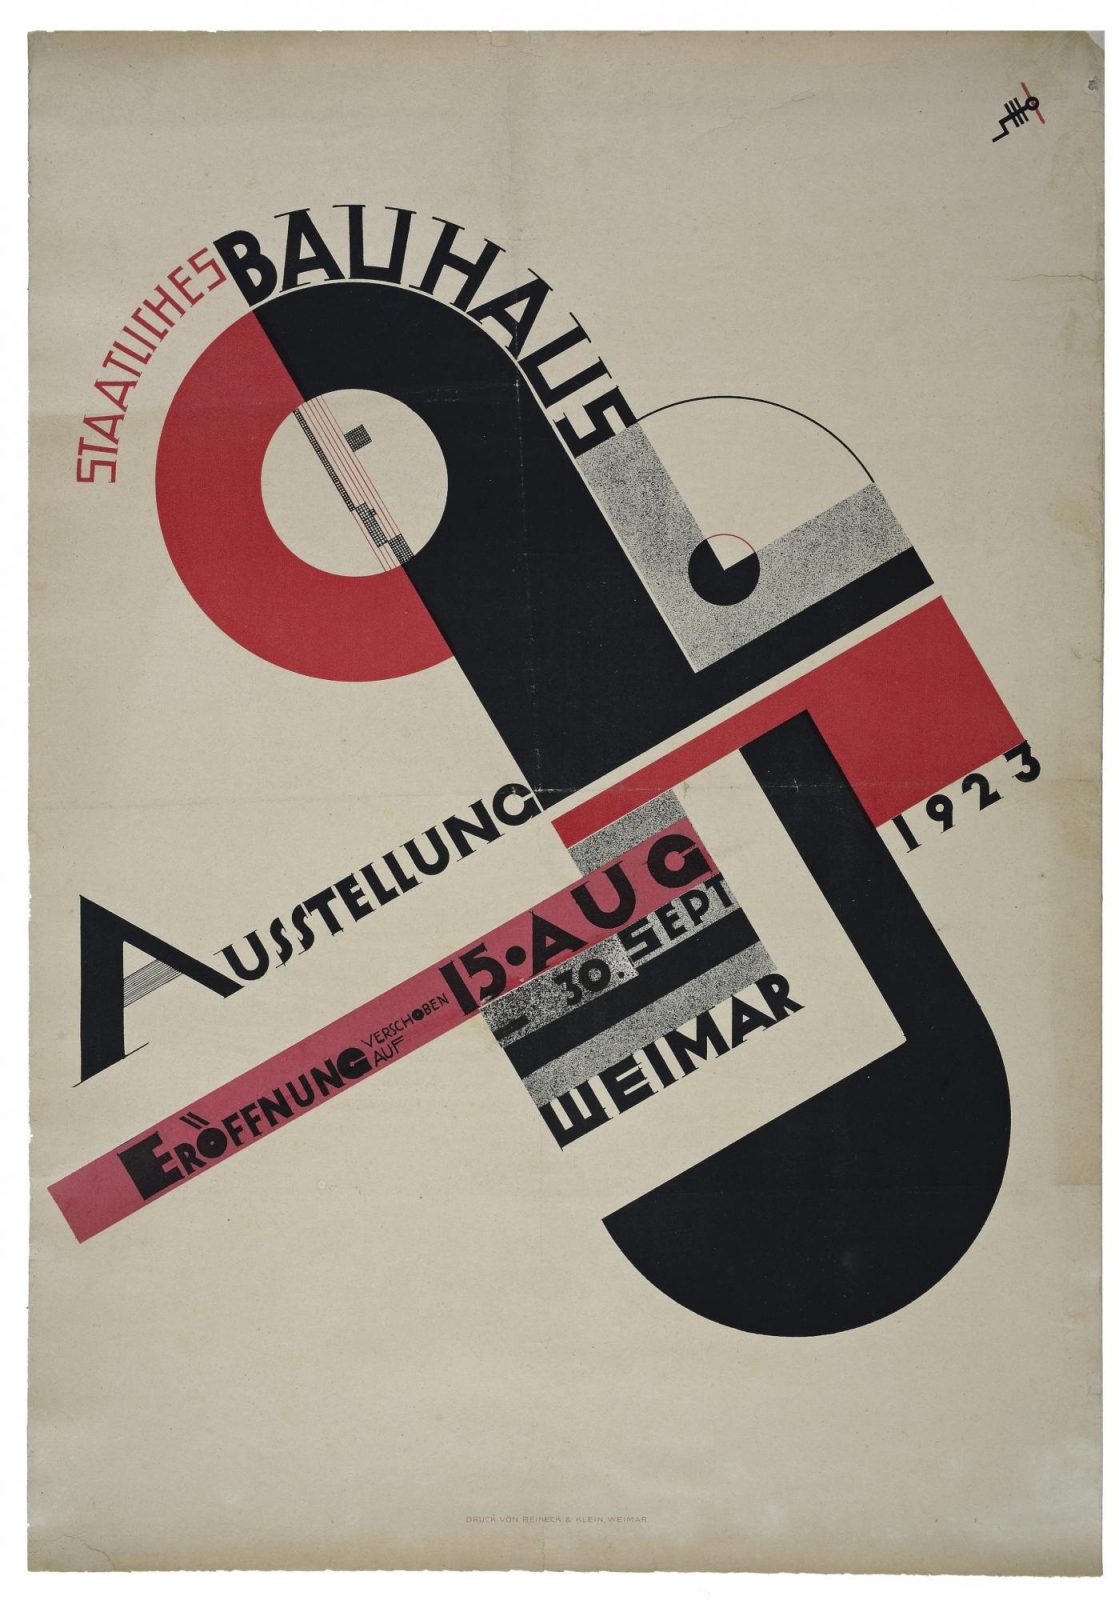 Opinion | What Was the Bauhaus? - The New York Times